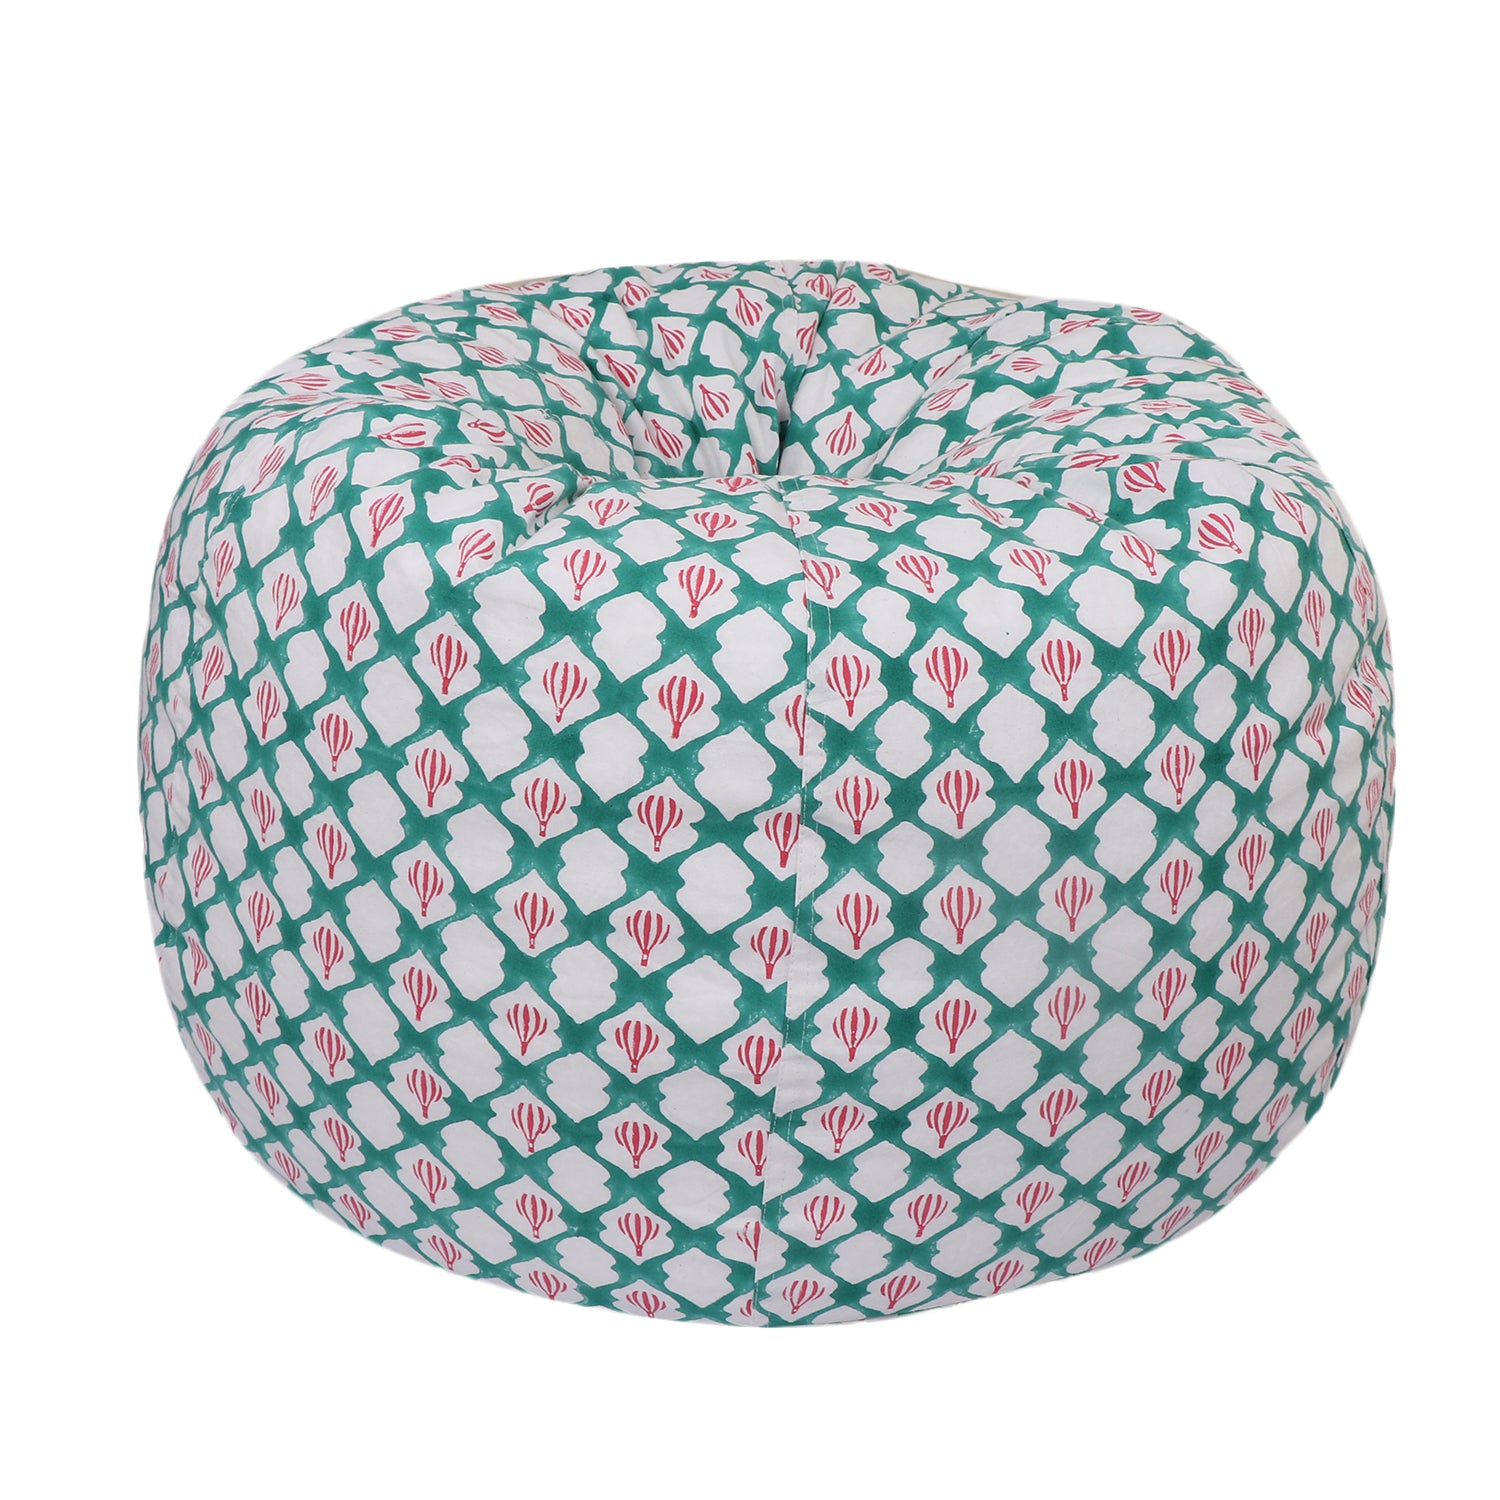 Vplanet® Organic Cotton Bean Bag, with Beans (3XL, Mint Green) : Amazon.in:  Home & Kitchen